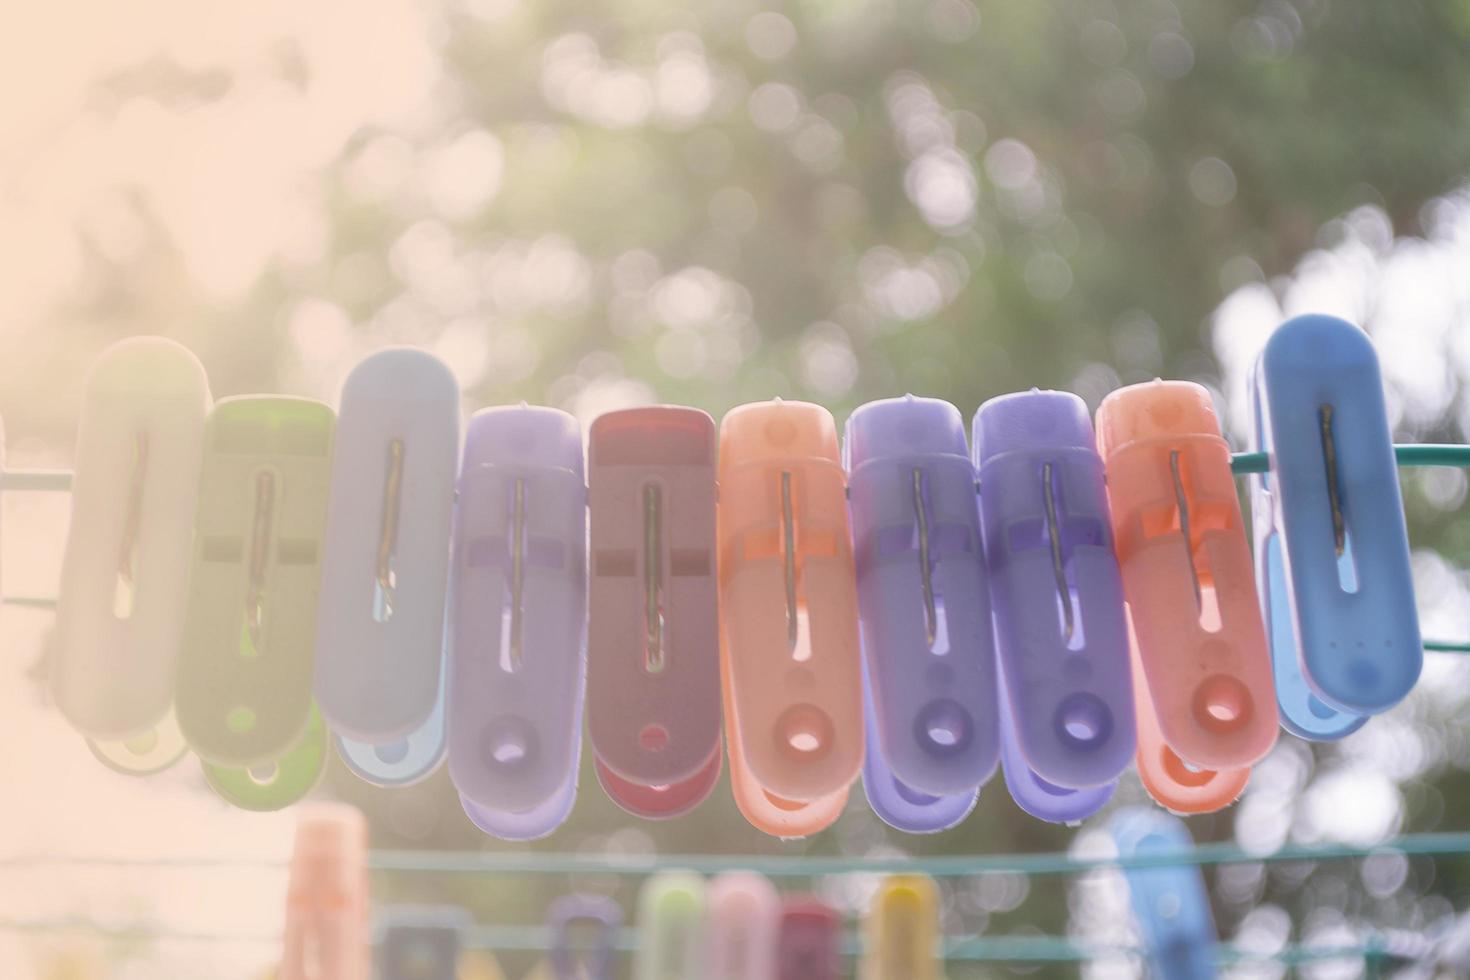 An image of very colorful clothes pegs on a clothesline photo